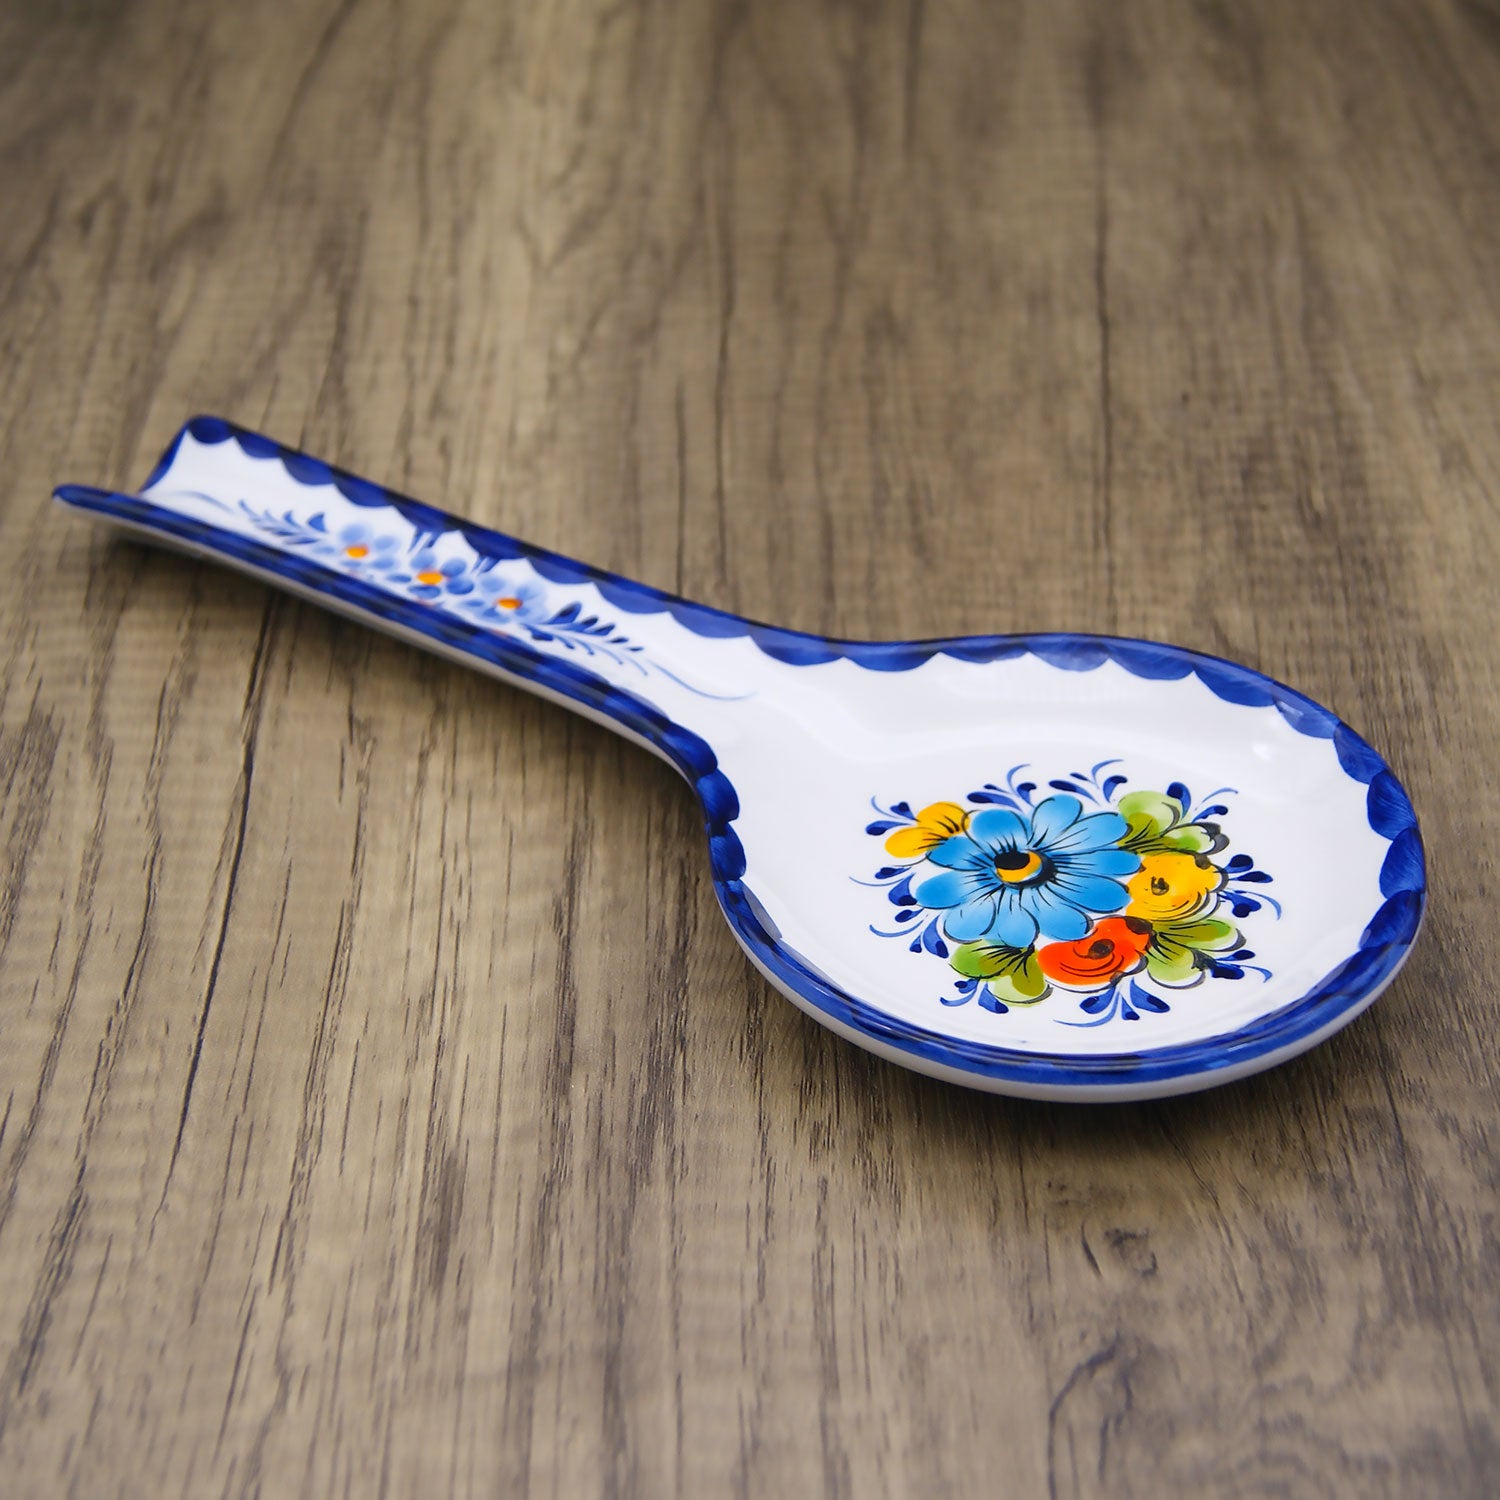 Portuguese Pottery Alcobaça Ceramic Hand Painted Kitchen Spoon Rest for Stove Top Made in Portugal